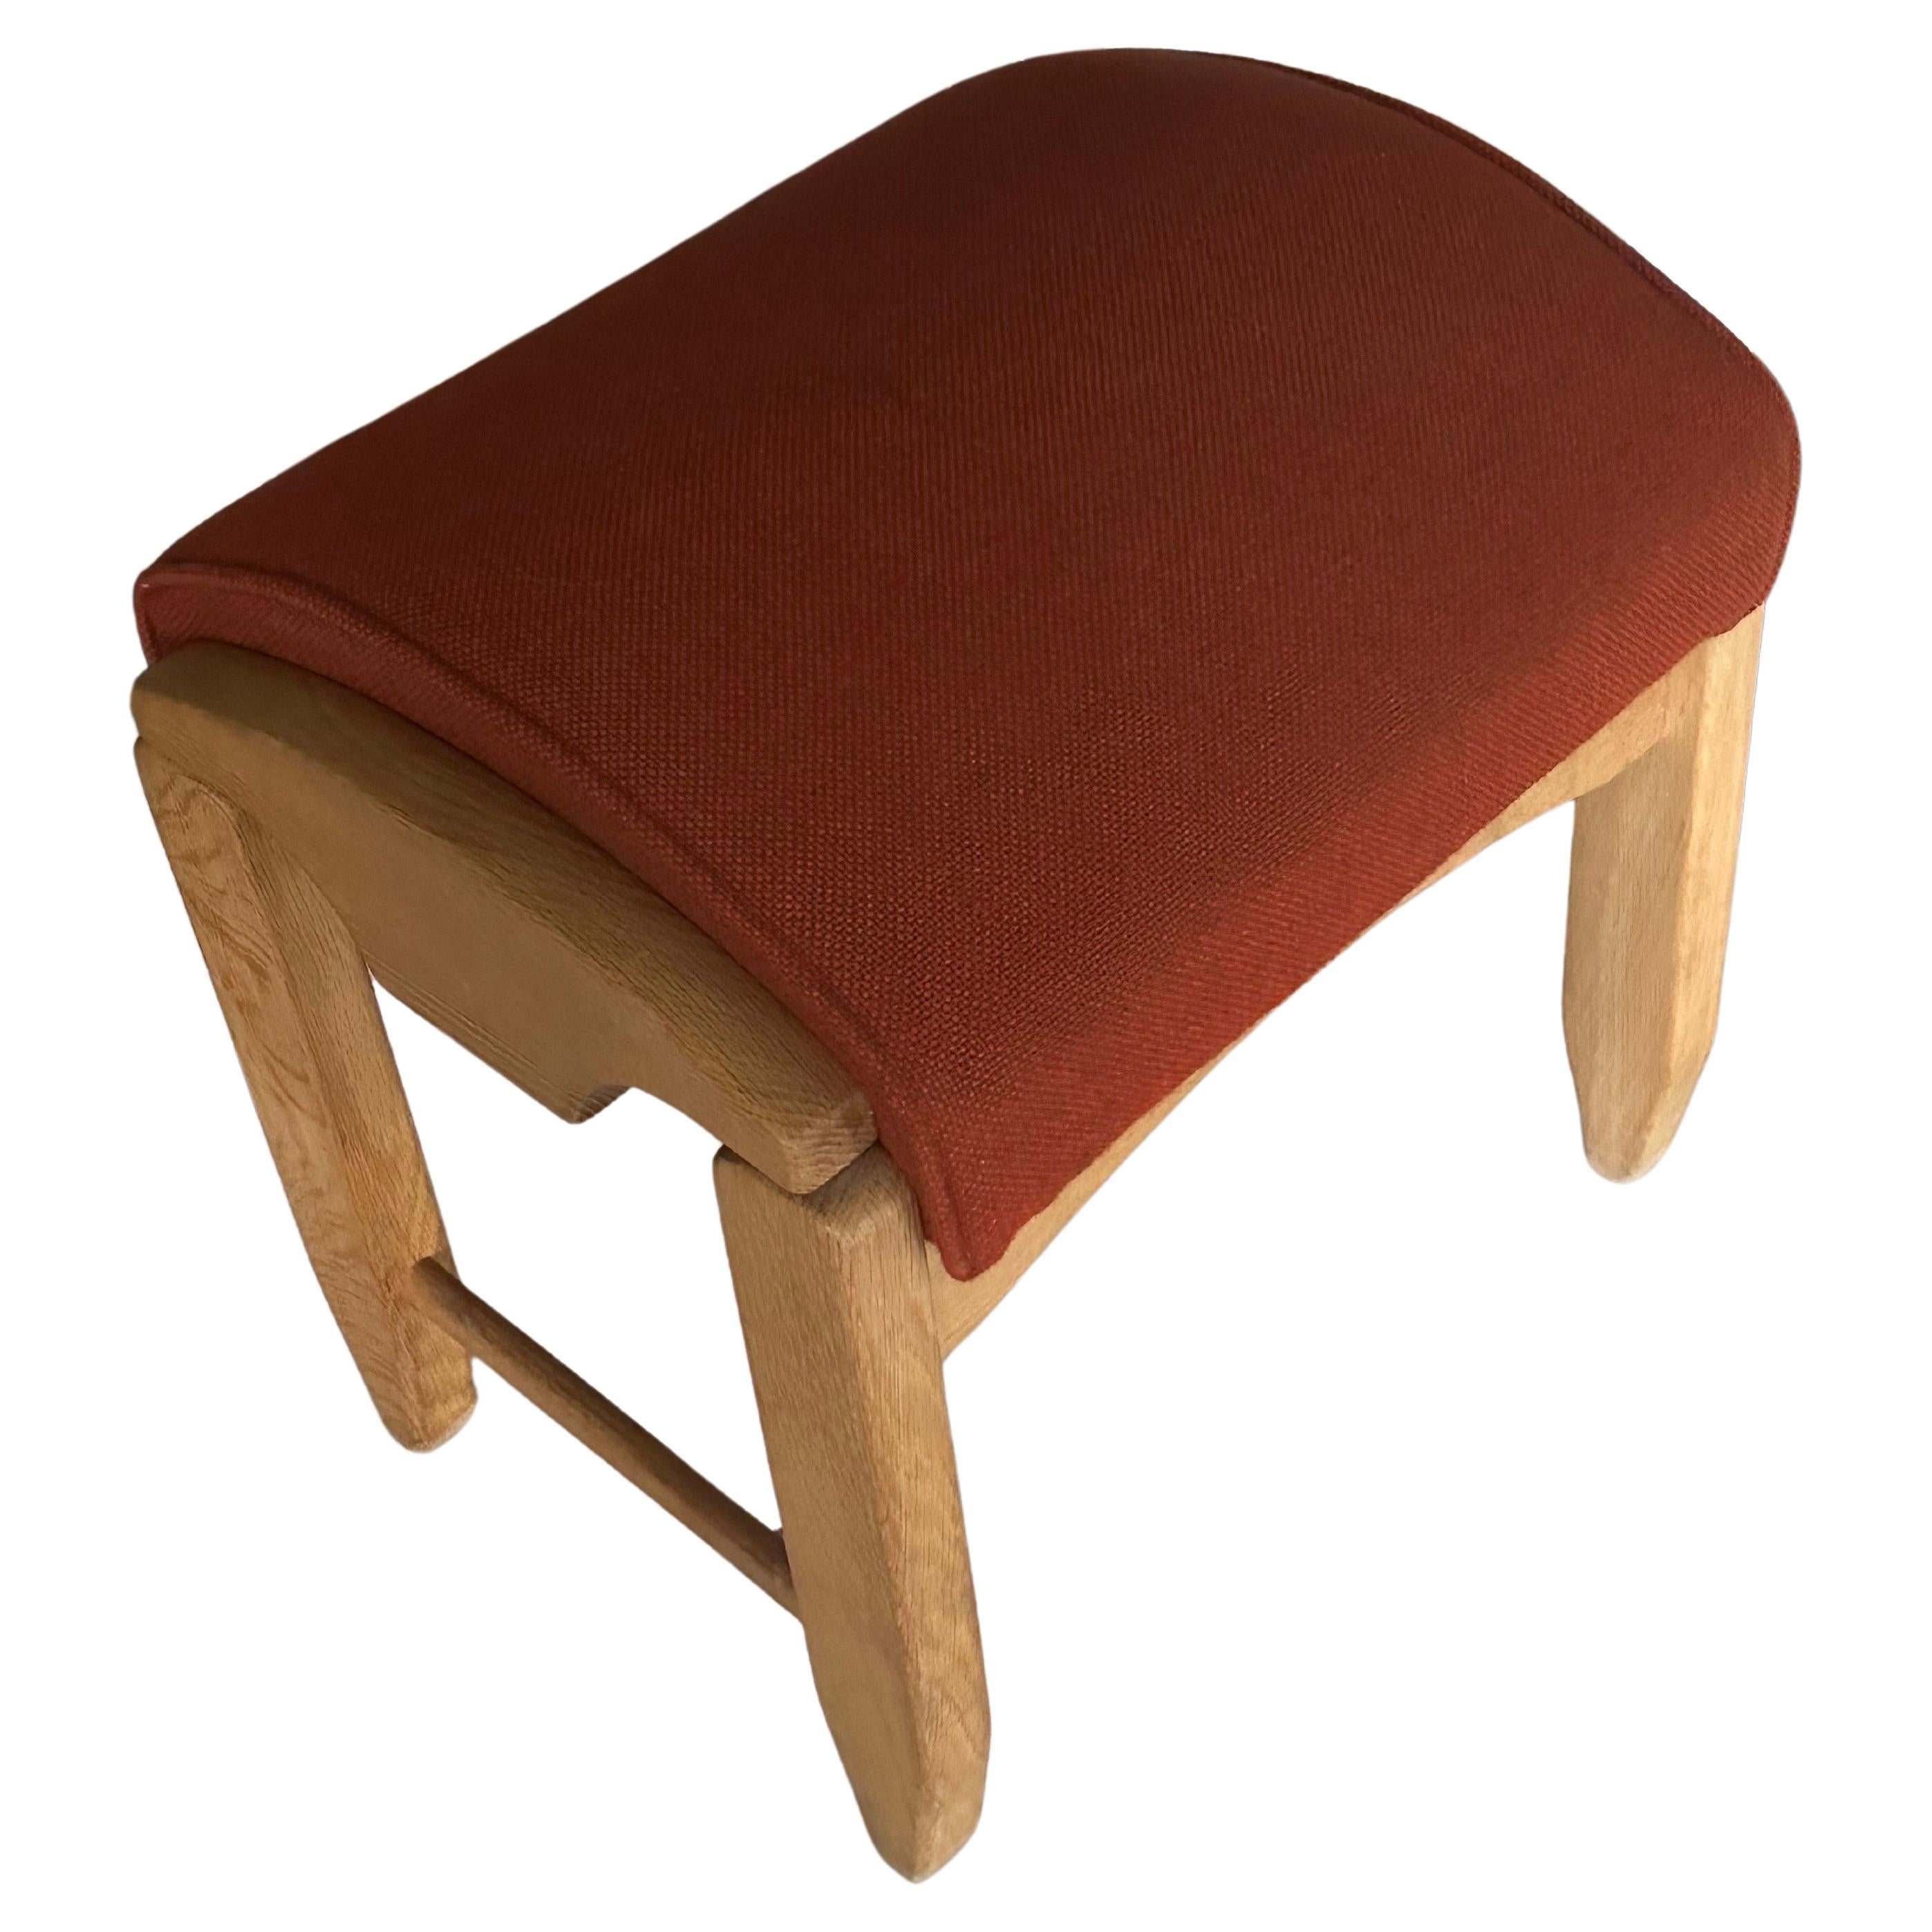 An unusual stool in oak and fabric